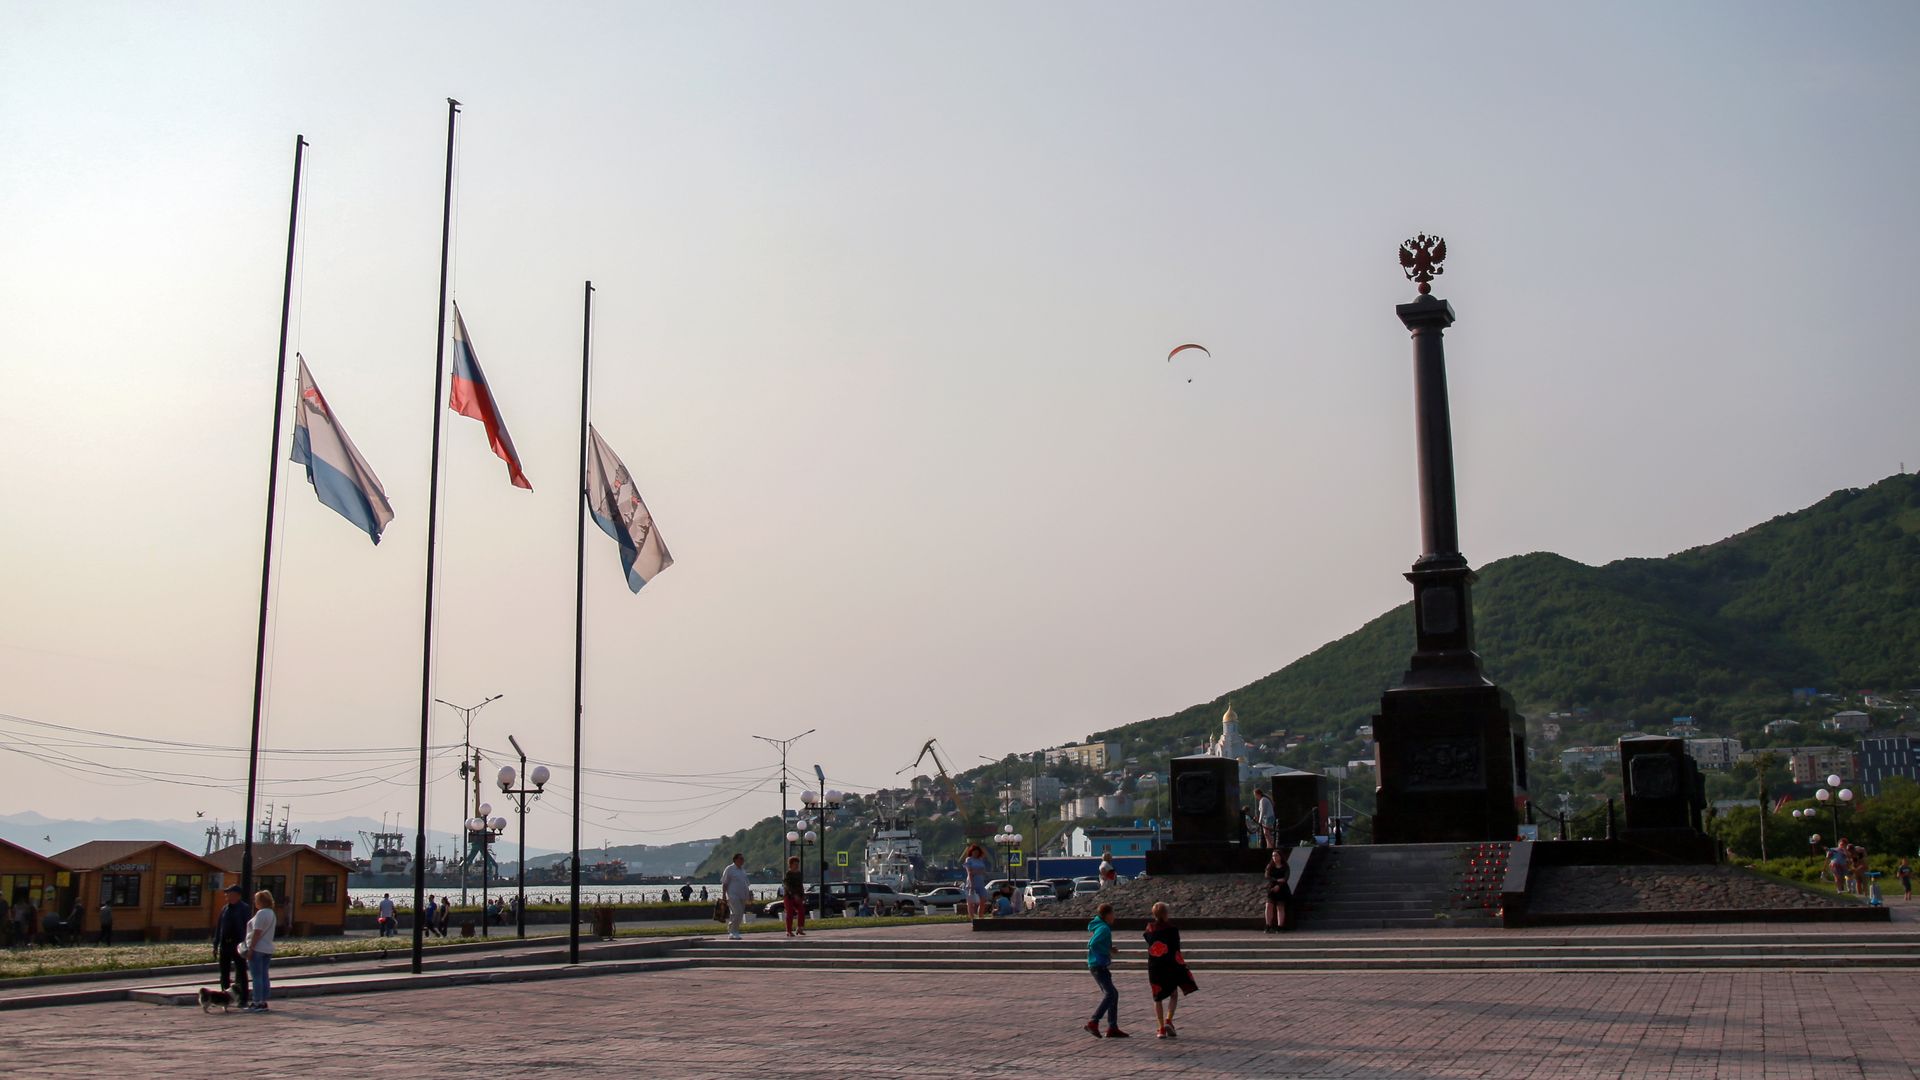 Flags of the Russian Federation and the Kamchatka Territory fly at half-mast by the City of Military Glory stele in memory of the victims of the Antonov An-26 passenger aircraft crash